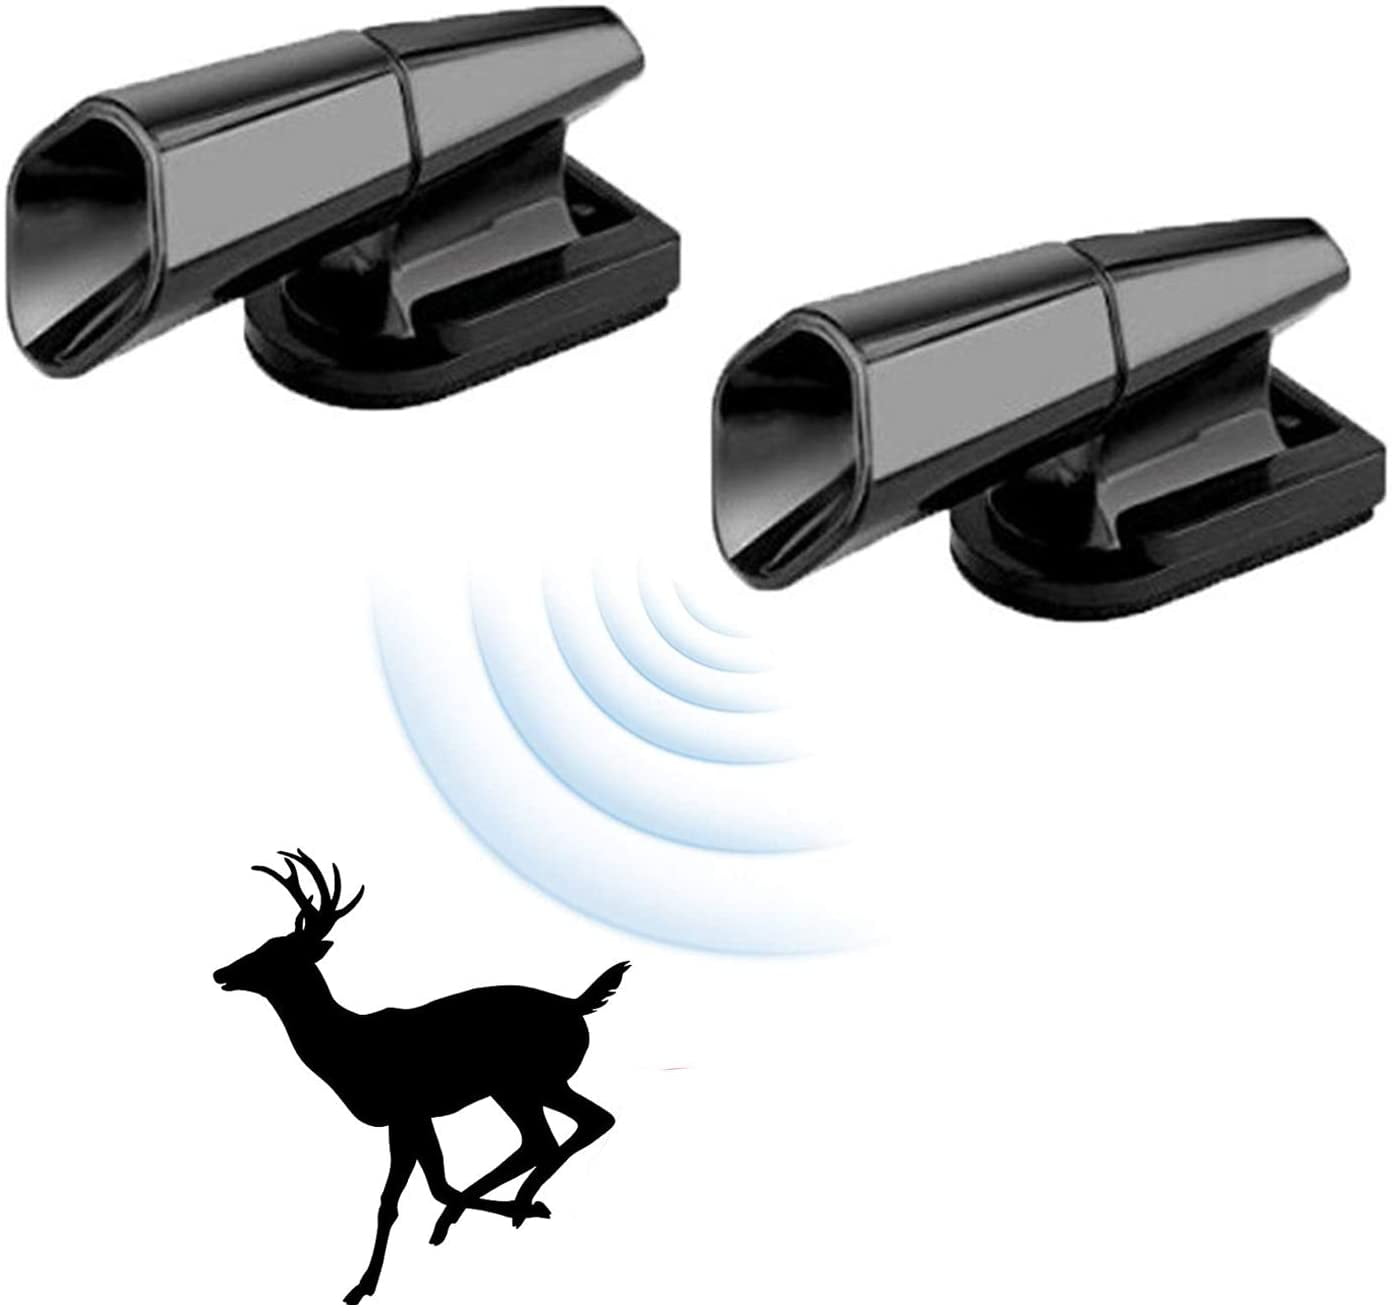 Deer Warning Silent Sirens Helps Reduce Accidents Chrome Finish Set of 2 